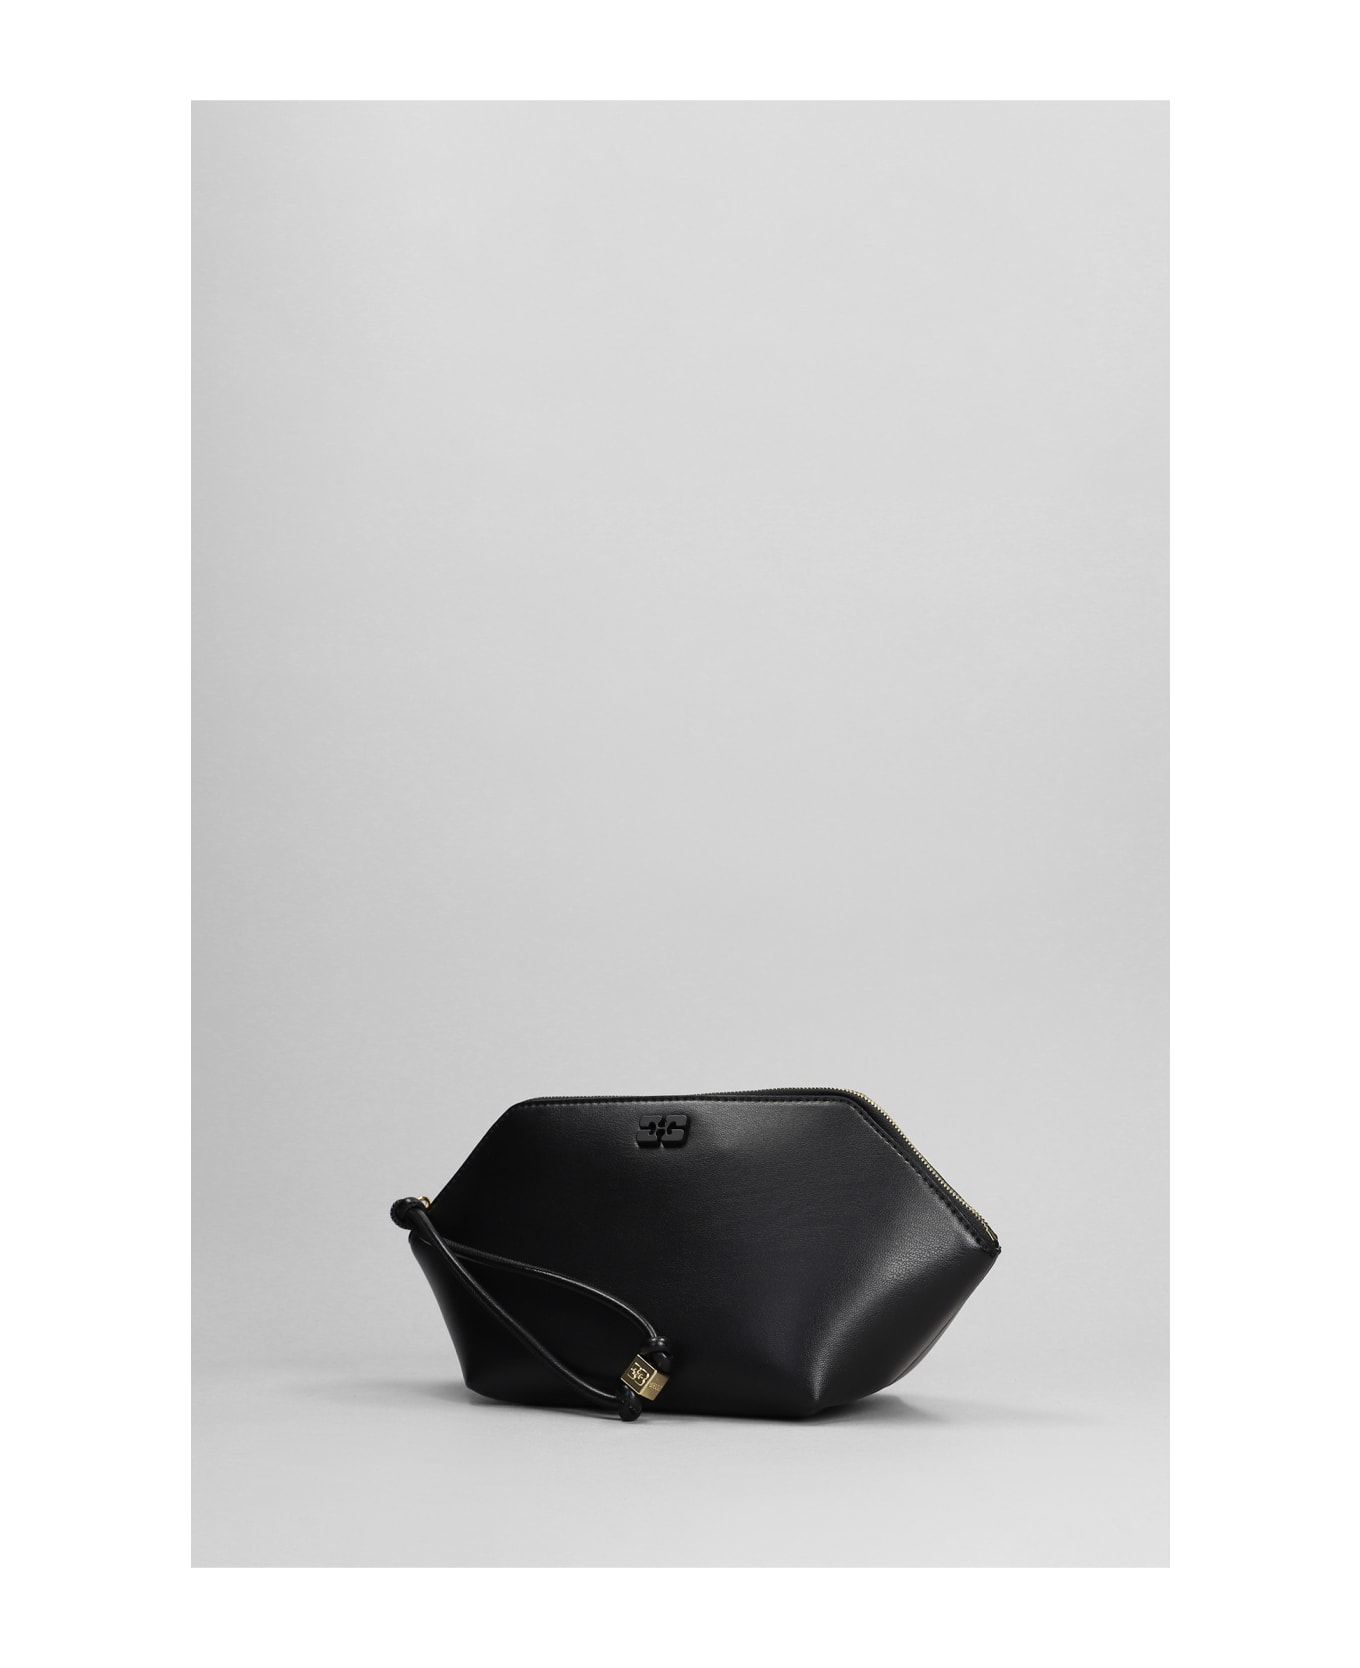 Ganni Bou Zipped Clutch In Black Leather - black クラッチバッグ